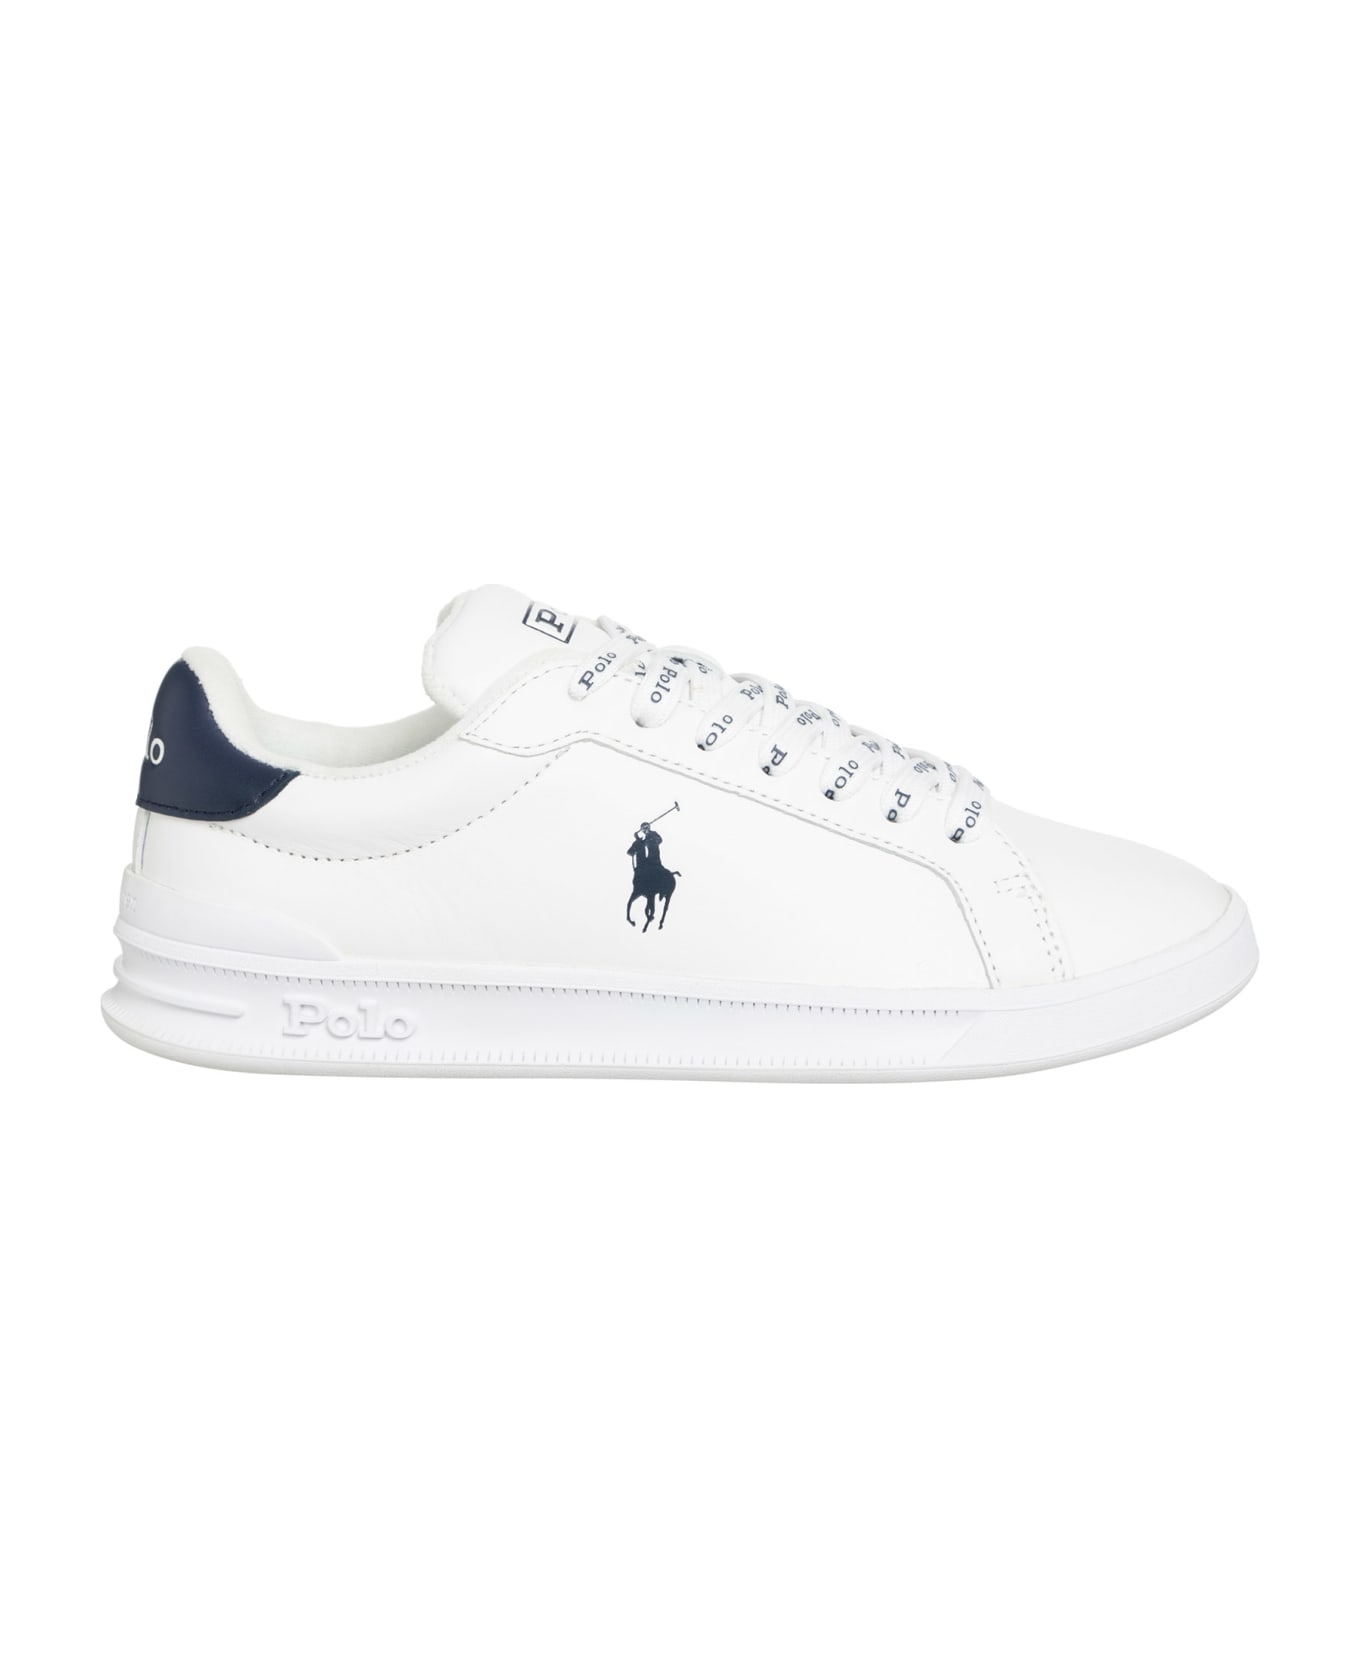 Polo Ralph Lauren 'heritage Court Ii' Leather Sneakers - WHITE